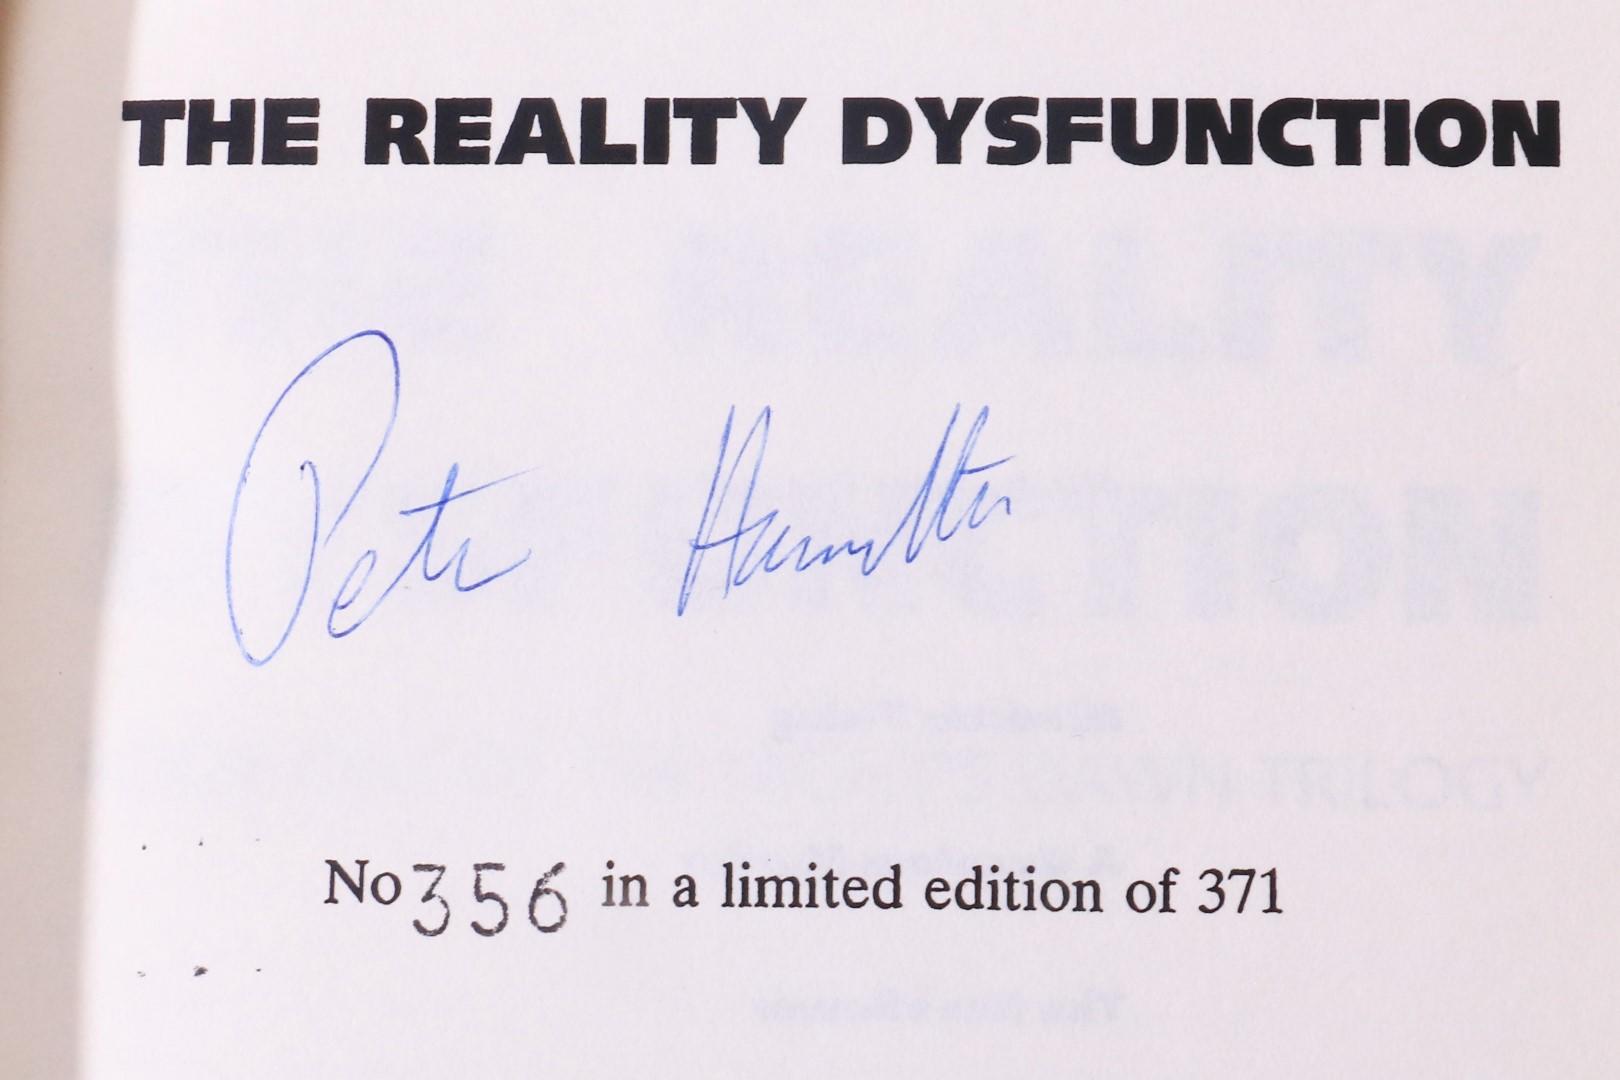 Peter F. Hamilton - The Reality Dysfunction - Macmillan, 1996, Proof. Signed